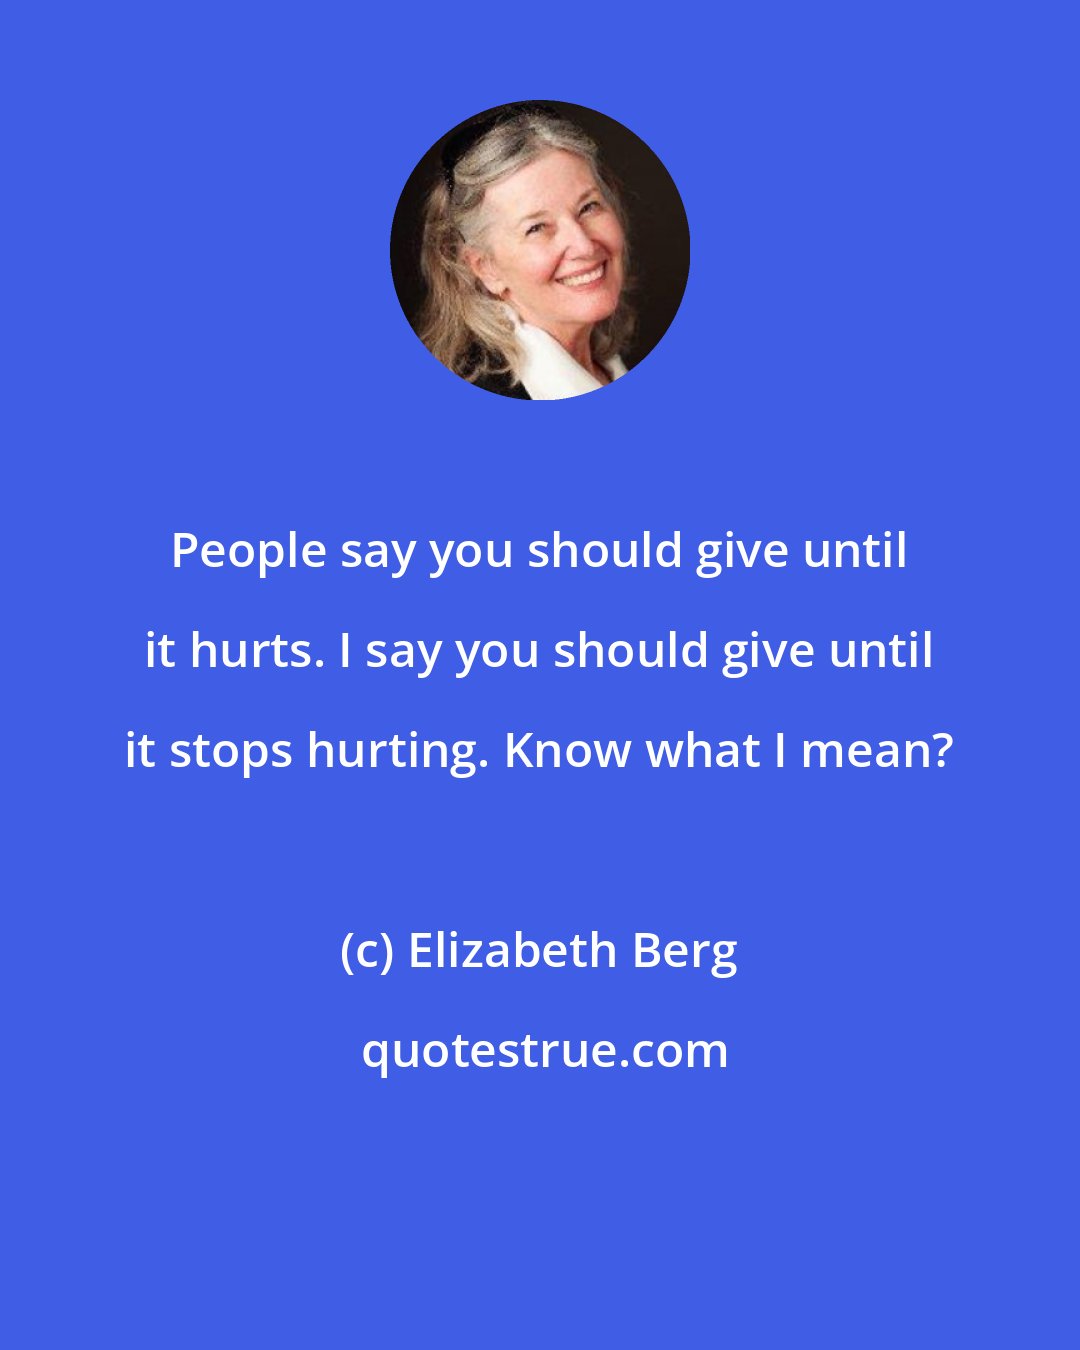 Elizabeth Berg: People say you should give until it hurts. I say you should give until it stops hurting. Know what I mean?